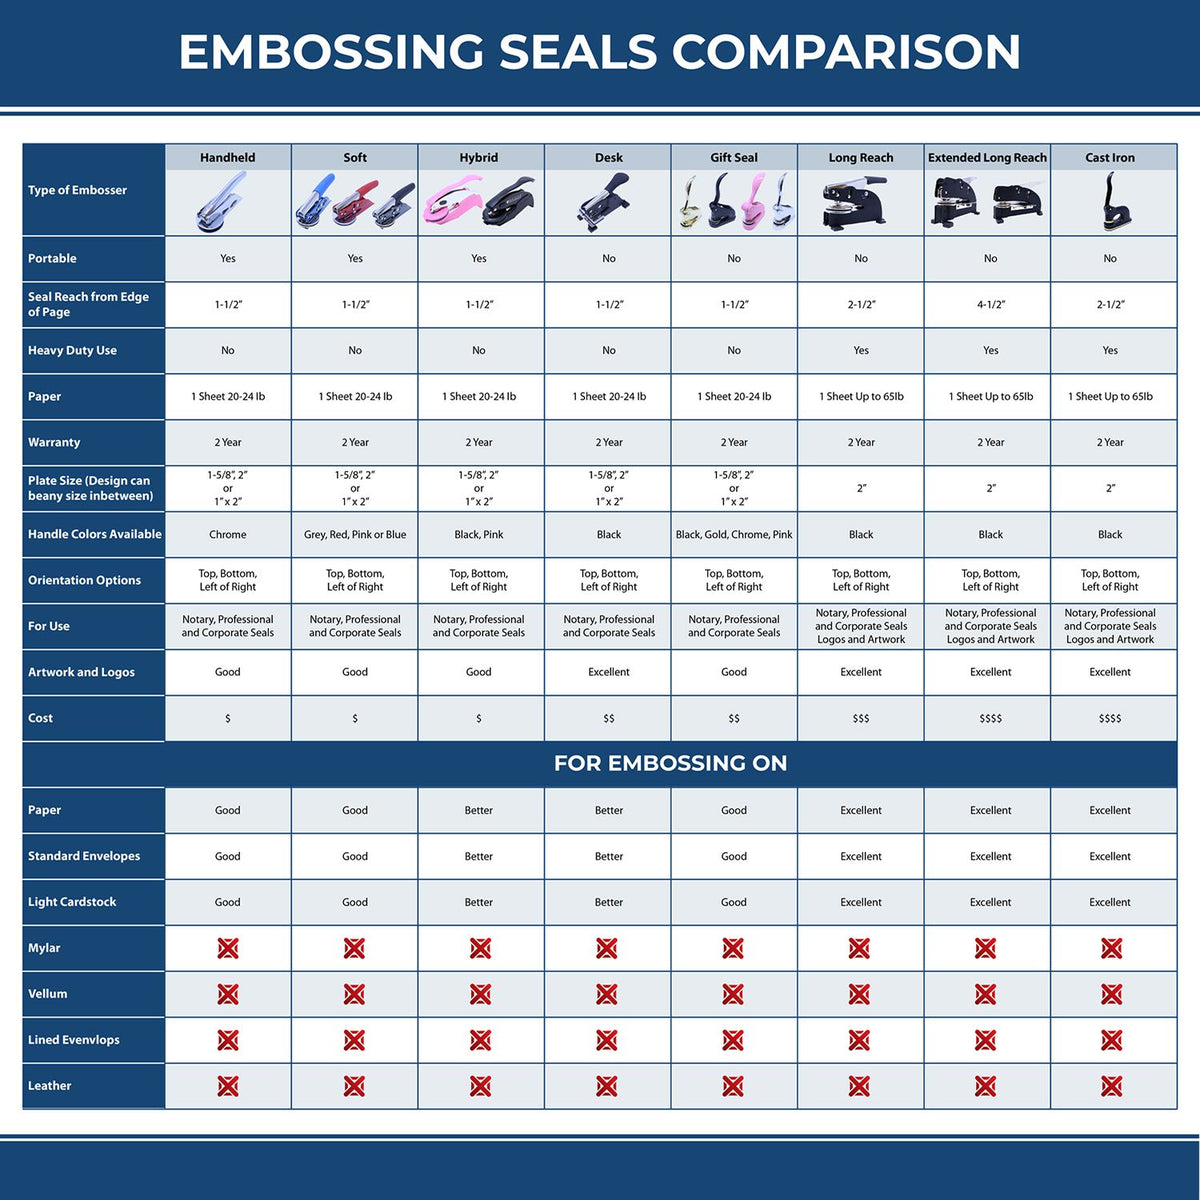 A comparison chart for the different types of mount models available for the Heavy Duty Cast Iron Maine Geologist Seal Embosser